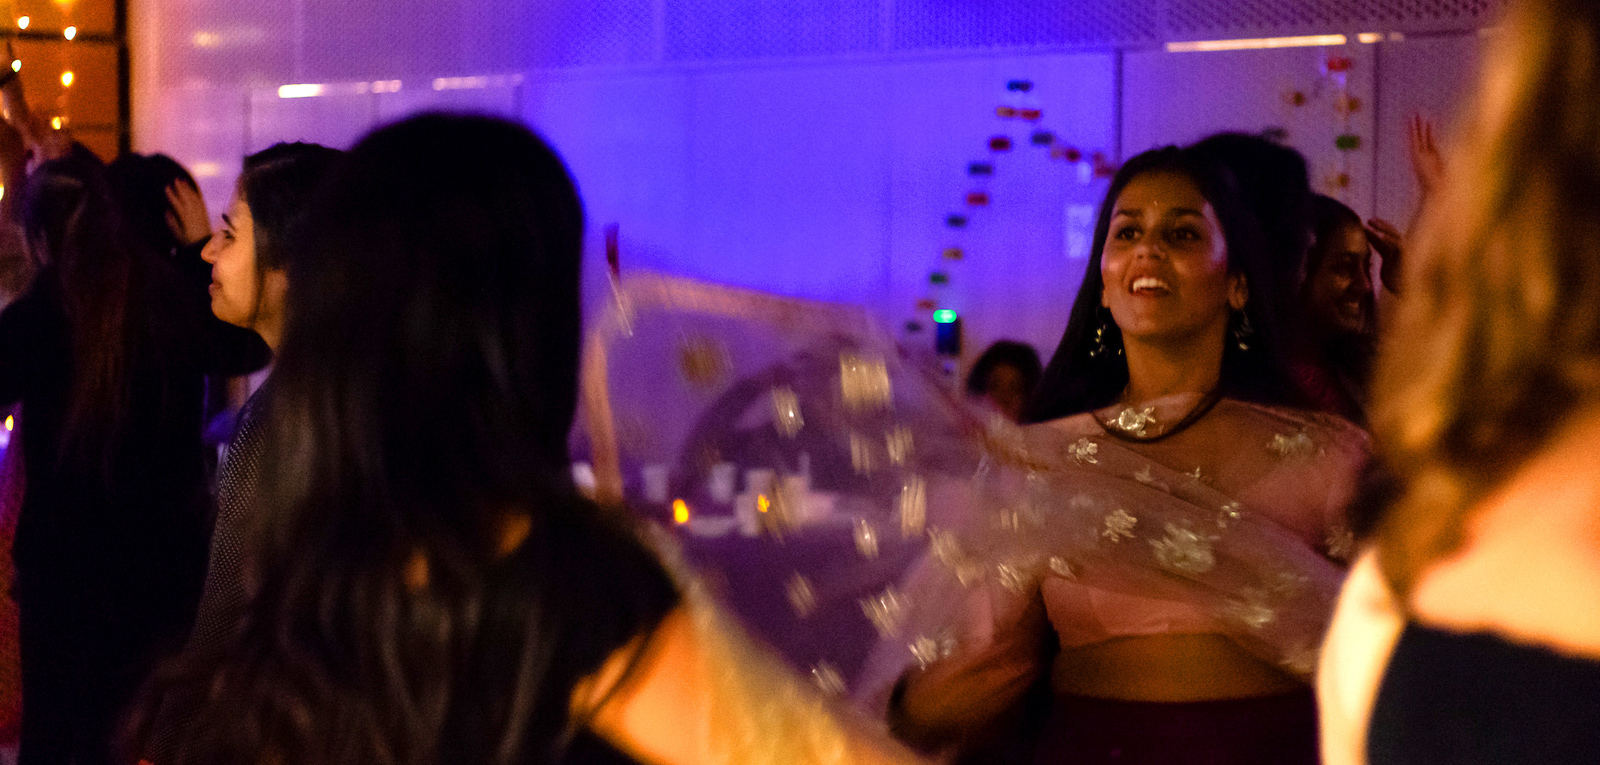 student wearing traditional Indian attire dances at a Diwali festival at Amherst